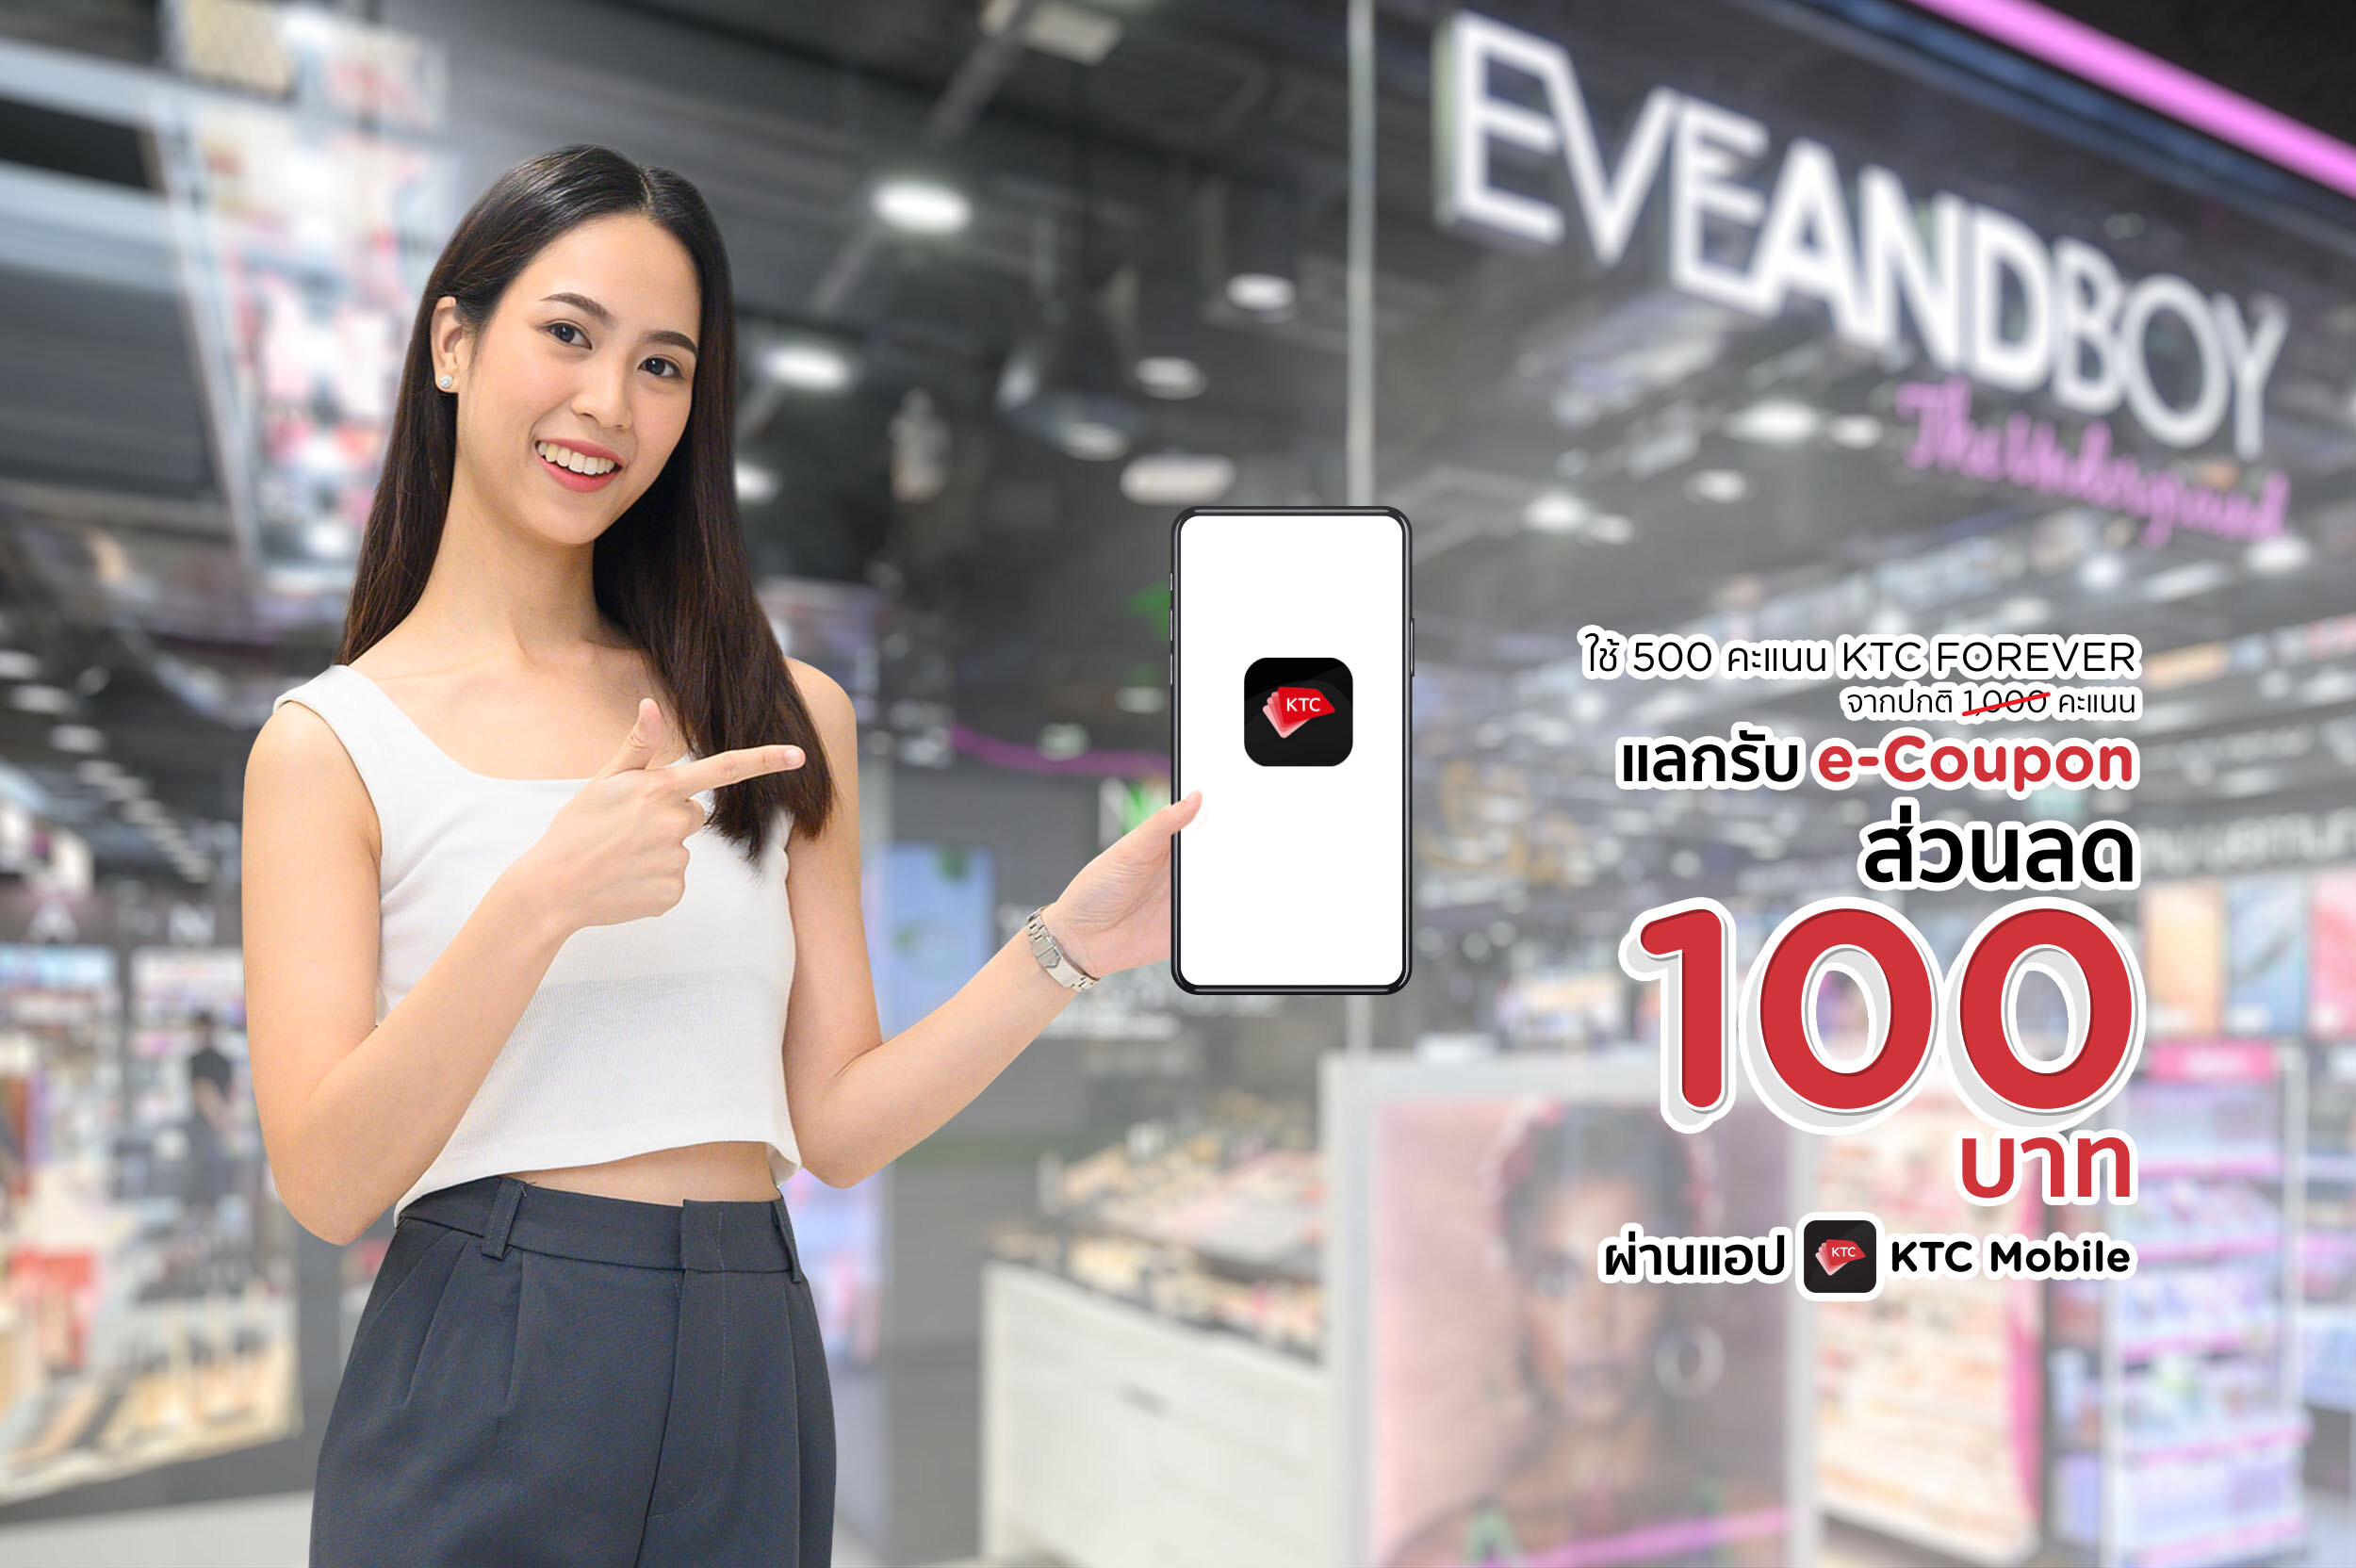 KTC jointly celebrates the 16th anniversary of EVEANDBOY and offers discount e-Coupons to shop value beauty products